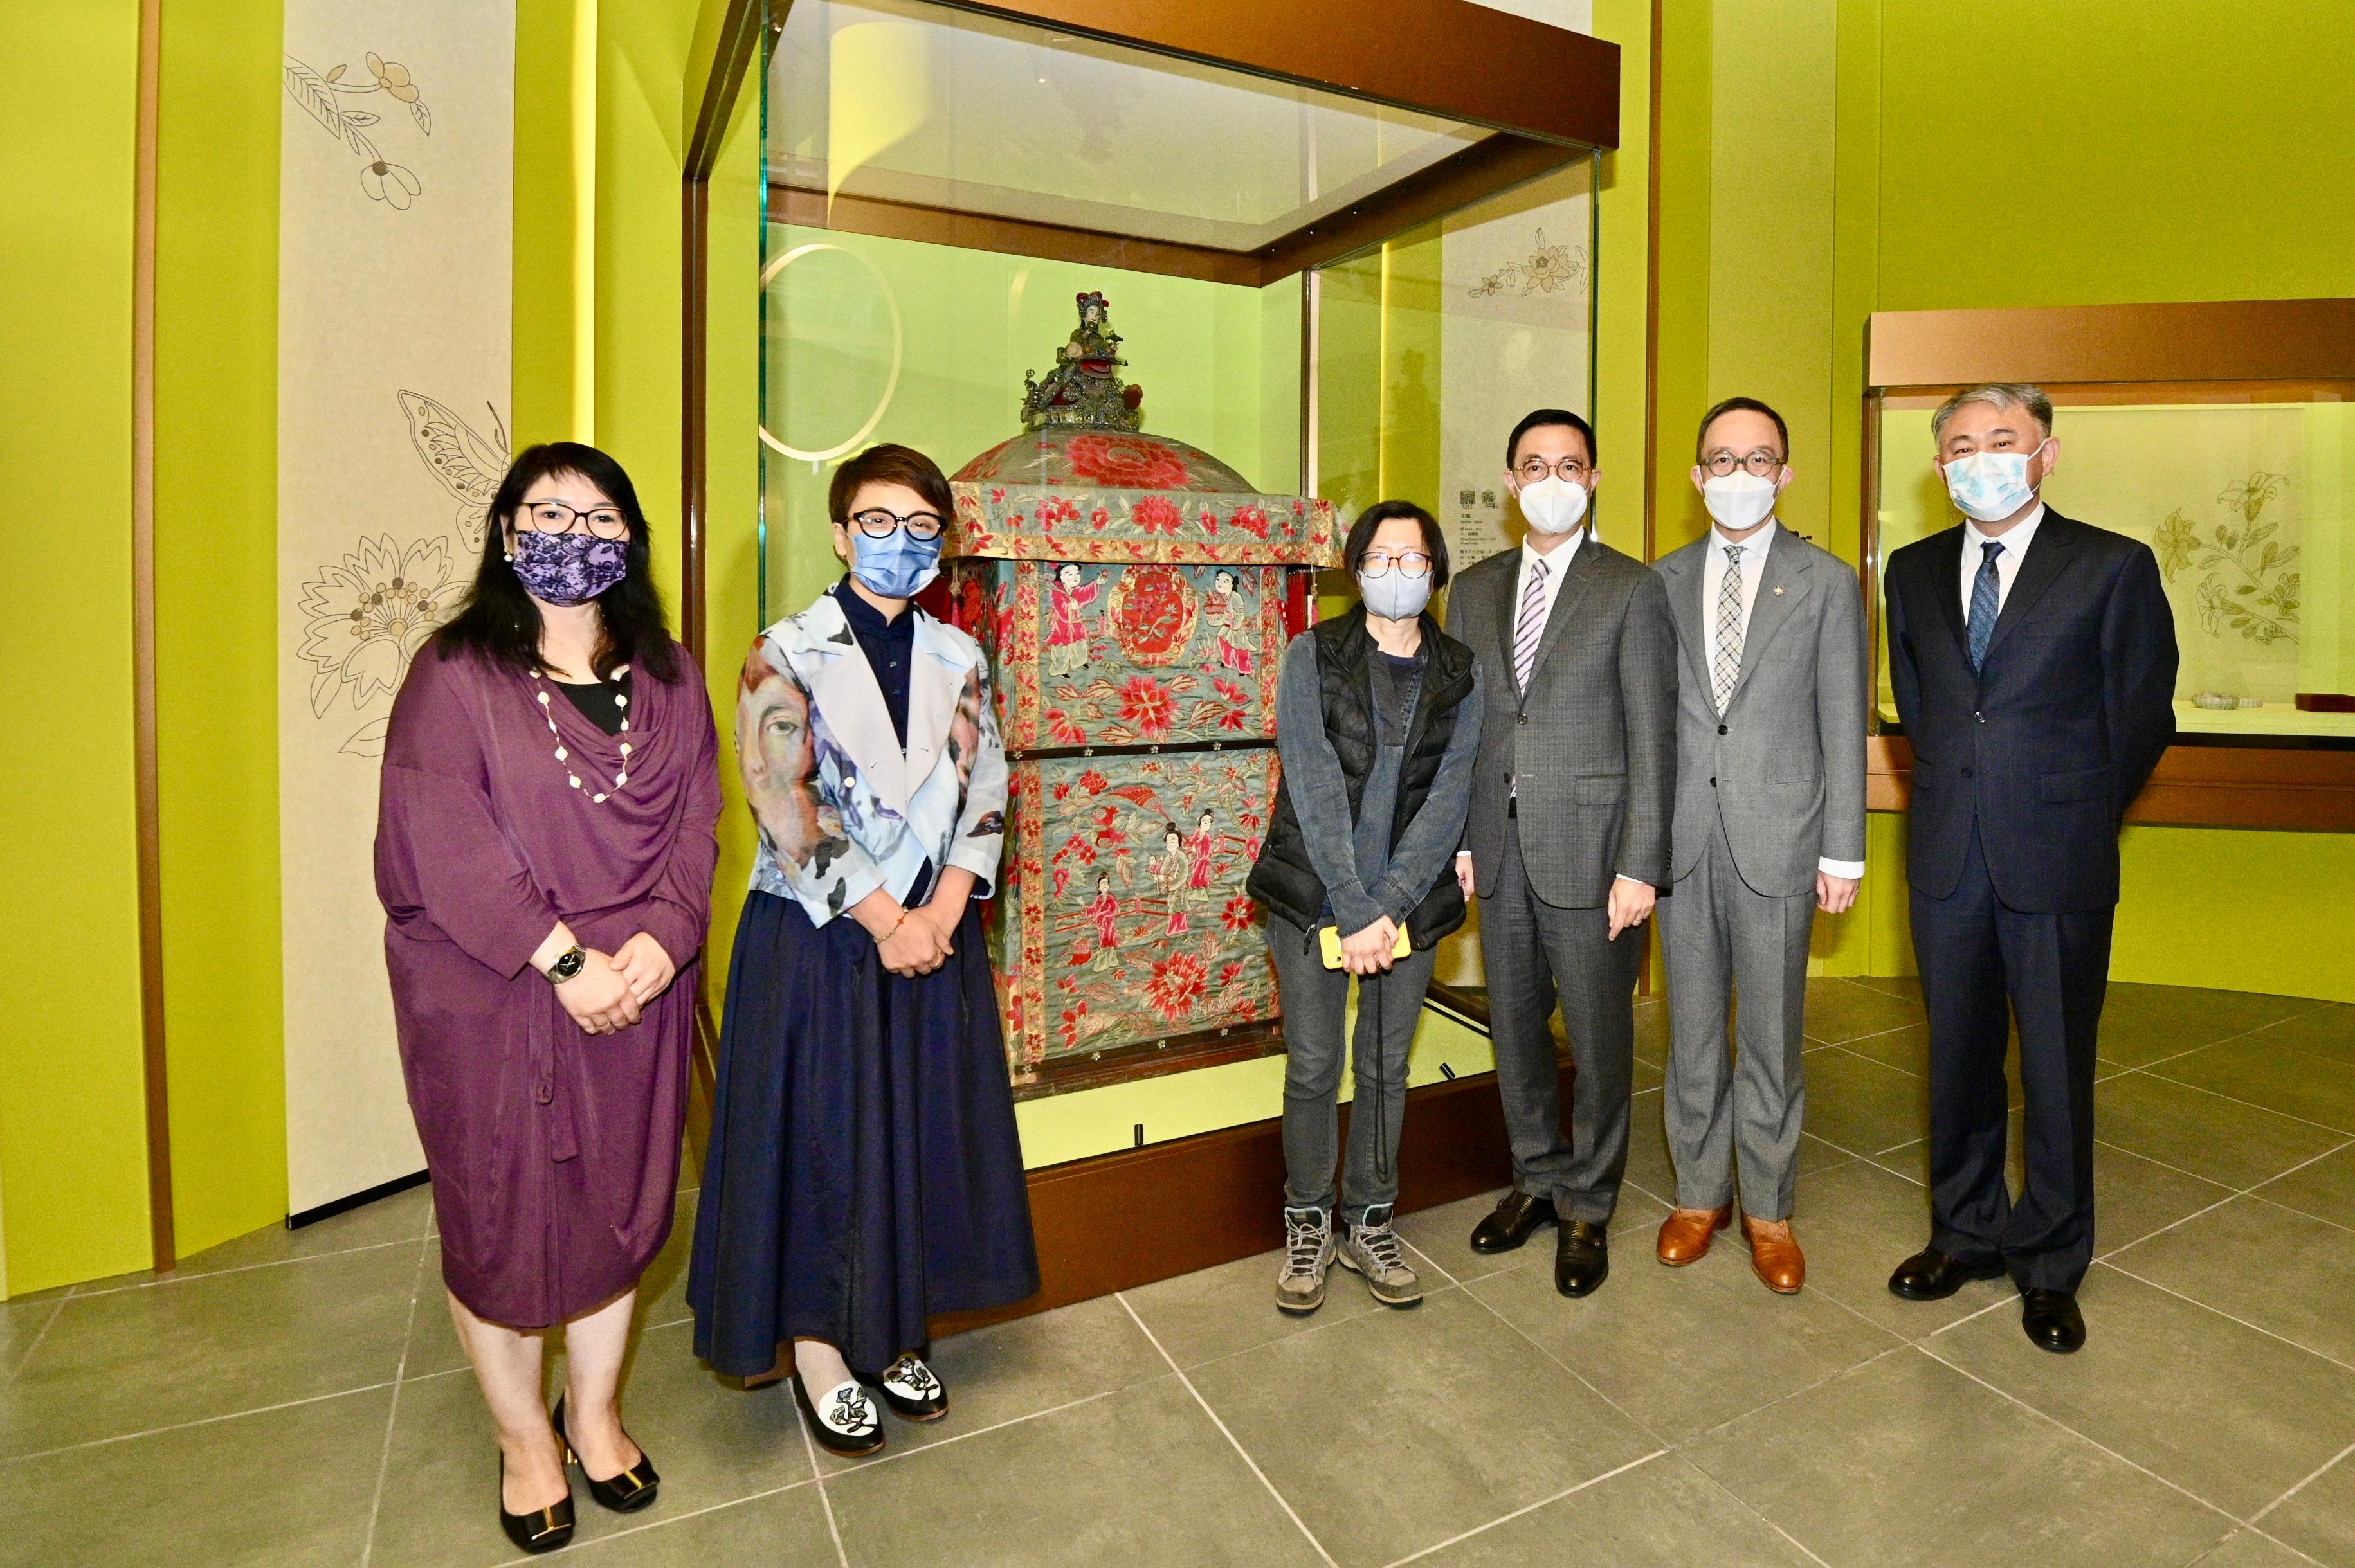 The opening ceremony for the exhibition "The Hong Kong Jockey Club Series: Women and Femininity in Ancient China - Treasures from the Nanjing Museum" was held today (November 29) at the Hong Kong Heritage Museum (HKHM). Photo shows the Secretary for Culture, Sports and Tourism, Mr Kevin Yeung (third right); the Vice Director of the Nanjing Museum, Mr Wang Qizhi (first right); the Executive Director, Charities and Community of the Hong Kong Jockey Club, Dr Gabriel Leung (second right); the Deputy Director of Leisure and Cultural Services (Culture), Ms Eve Tam (second left); the researcher of the Nanjing Museum, Ms Cao Qing (third left) and the Museum Director of the HKHM, Ms Fione Lo (first left) touring the exhibition.